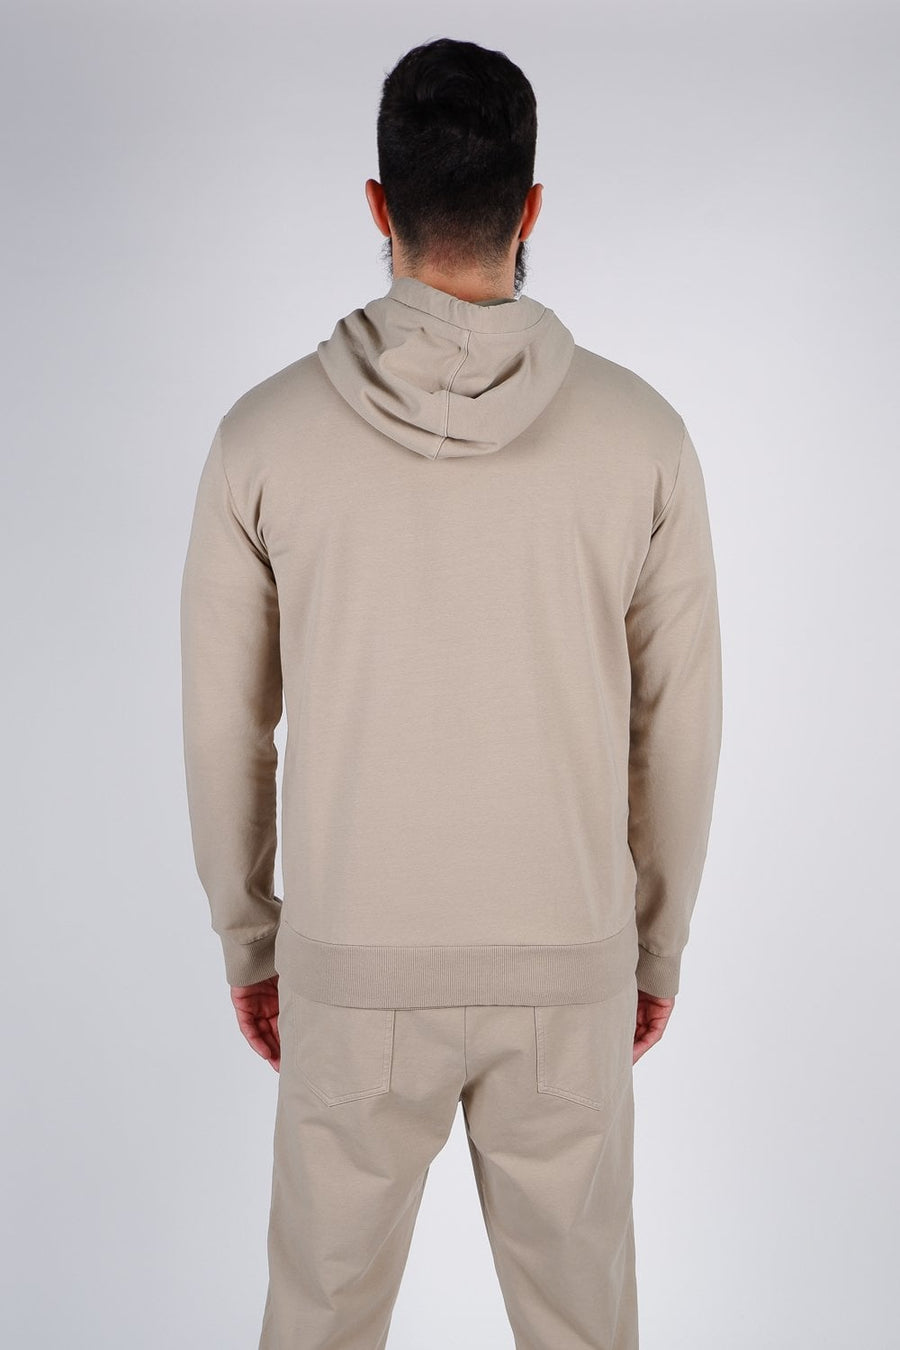 Buy the Daniele Fiesoli Jersey Hoodie in Taupe at Intro. Spend £50 for free UK delivery. Official stockists. We ship worldwide.